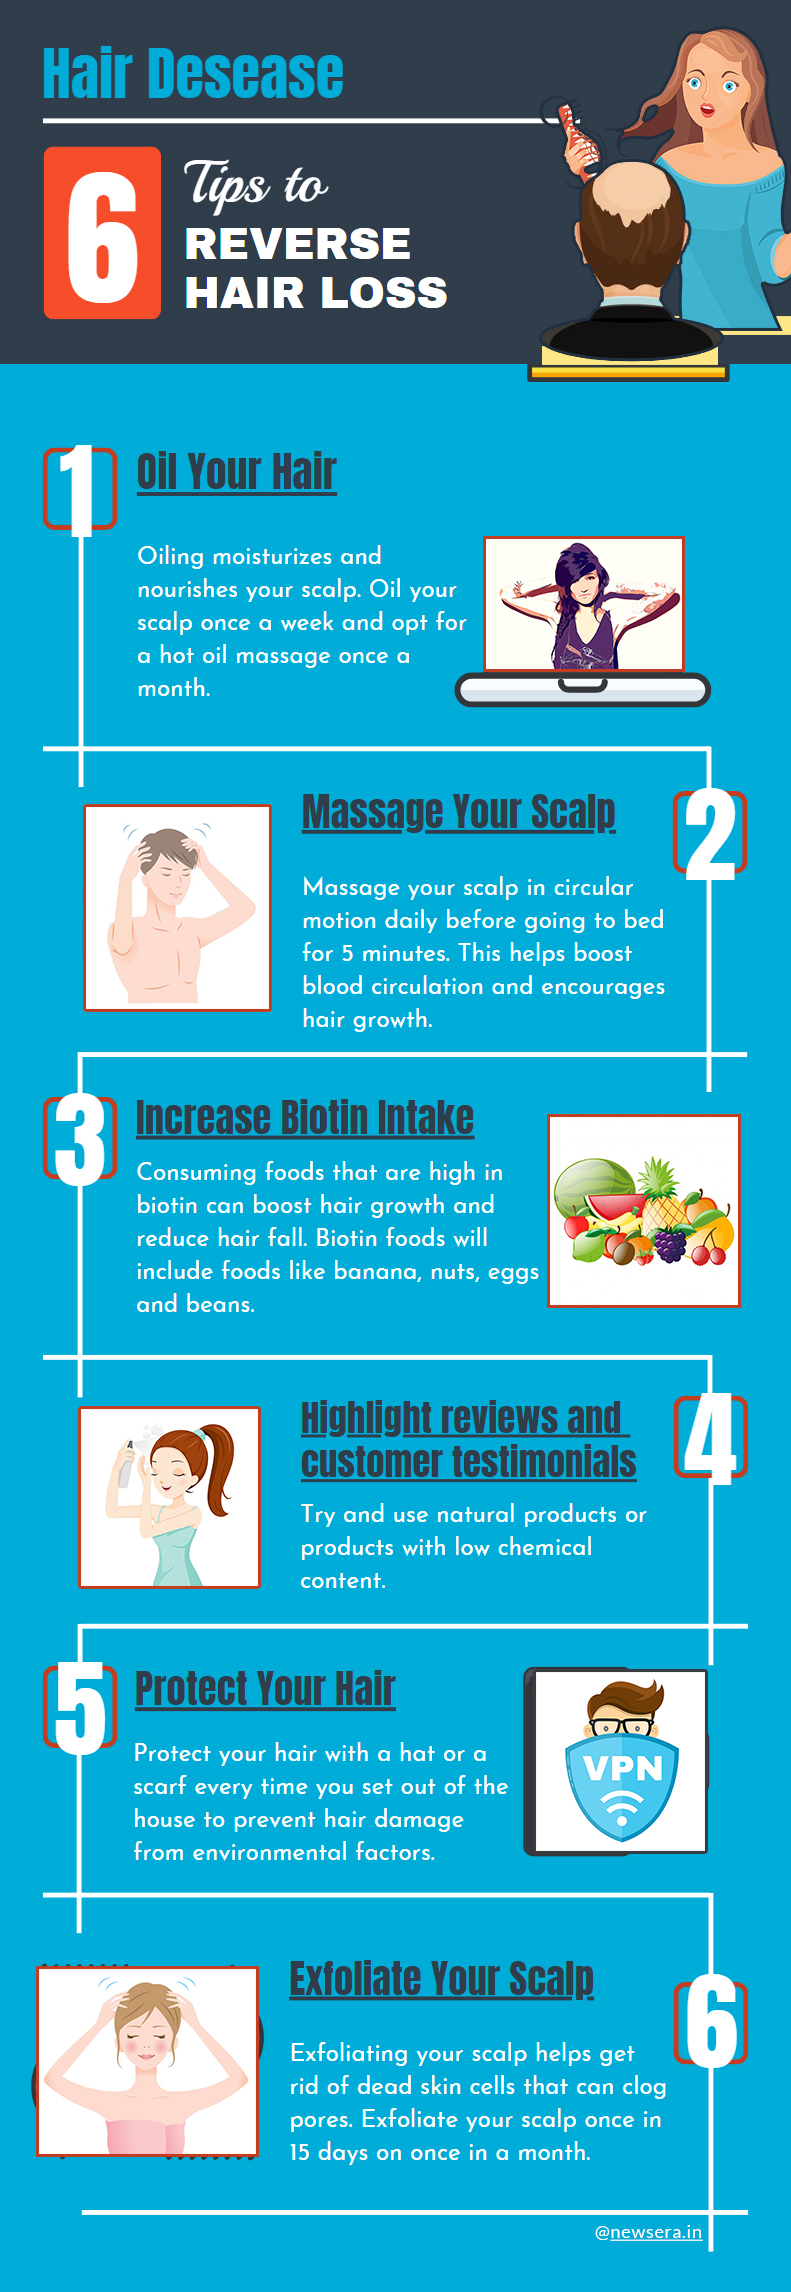 Fight hair loss naturally - Newsera - Info graphic and text